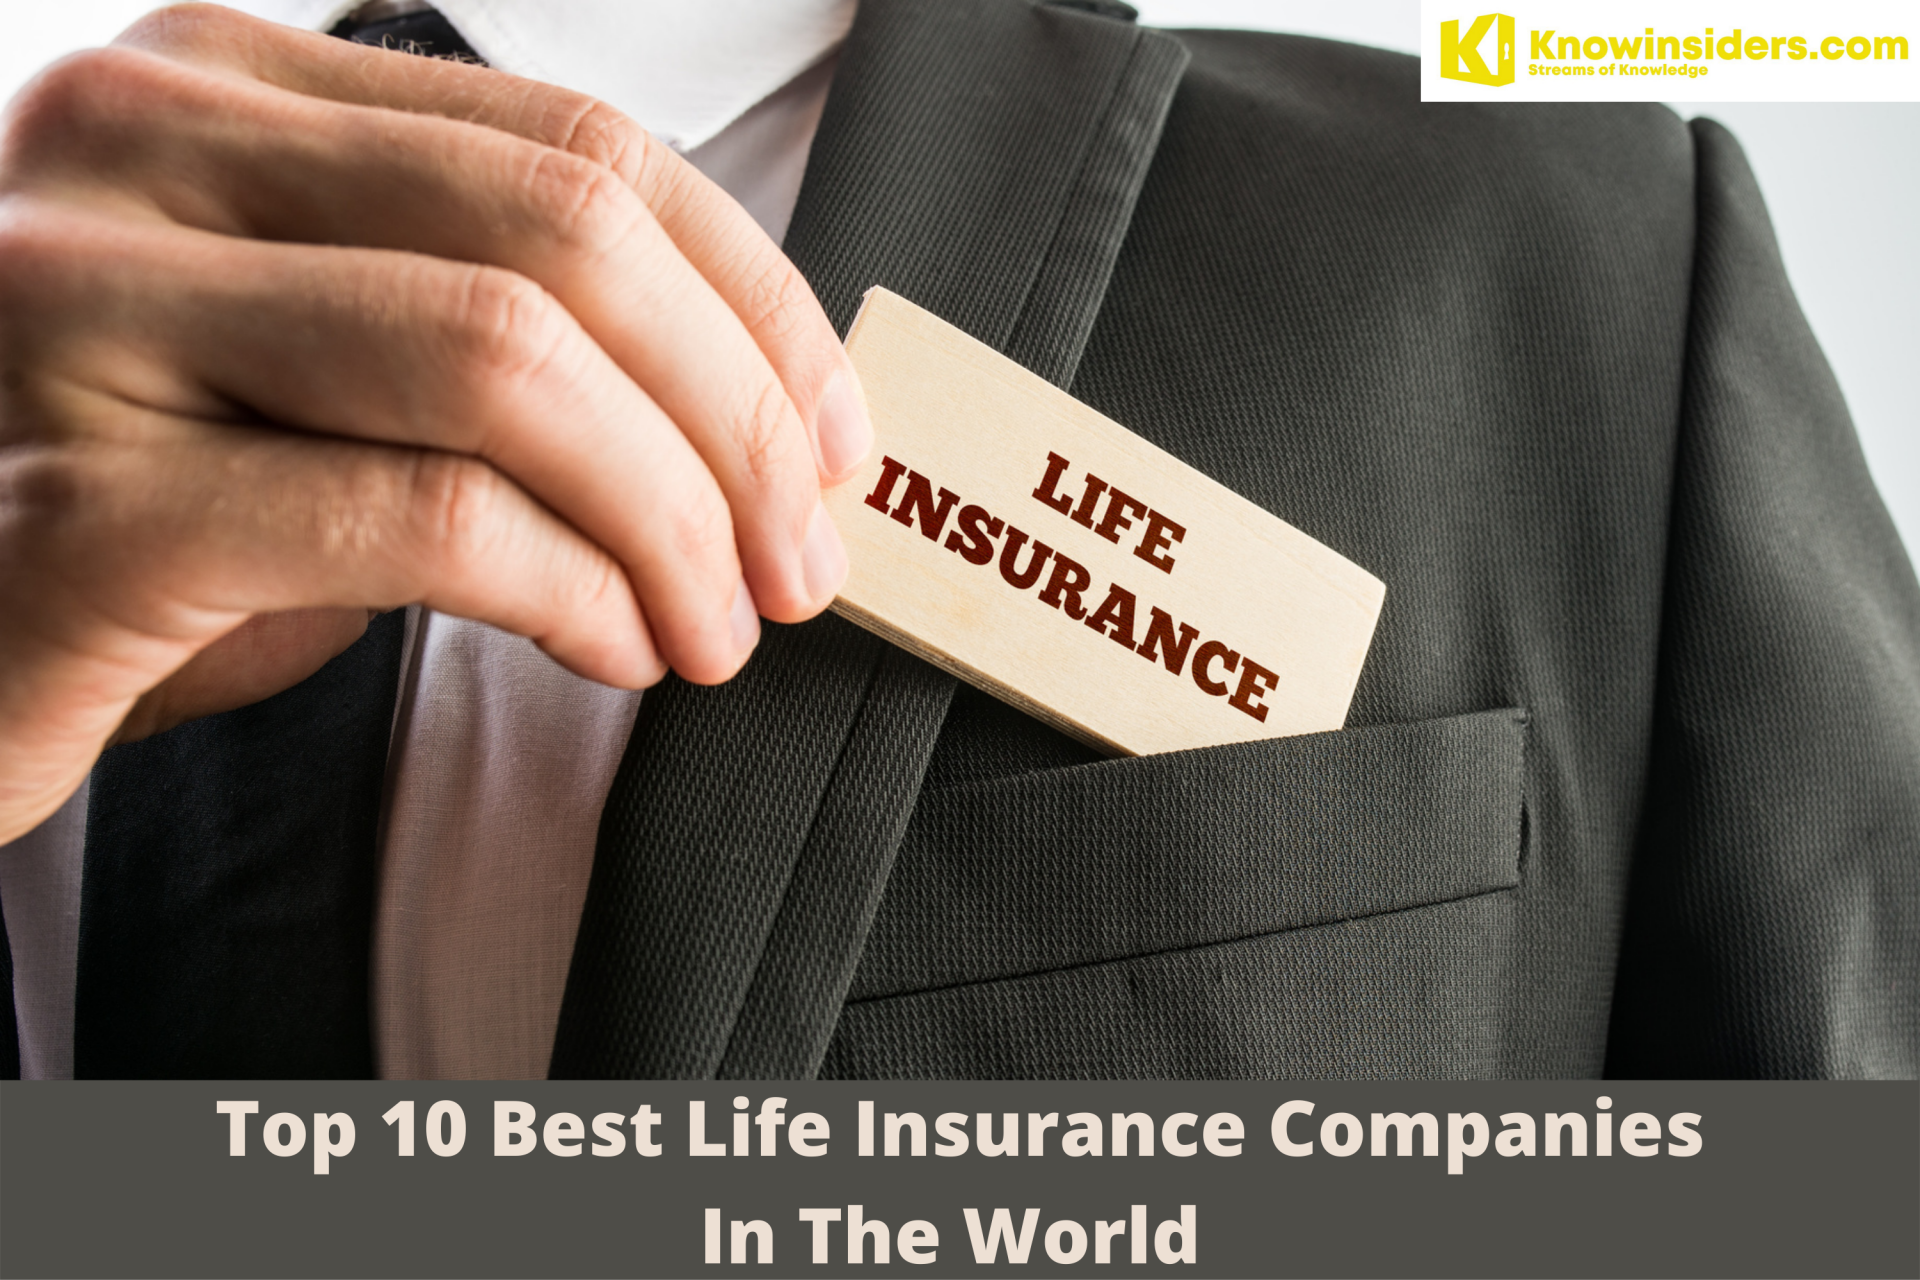 Top 10 Best Life Insurance Companies In The World 